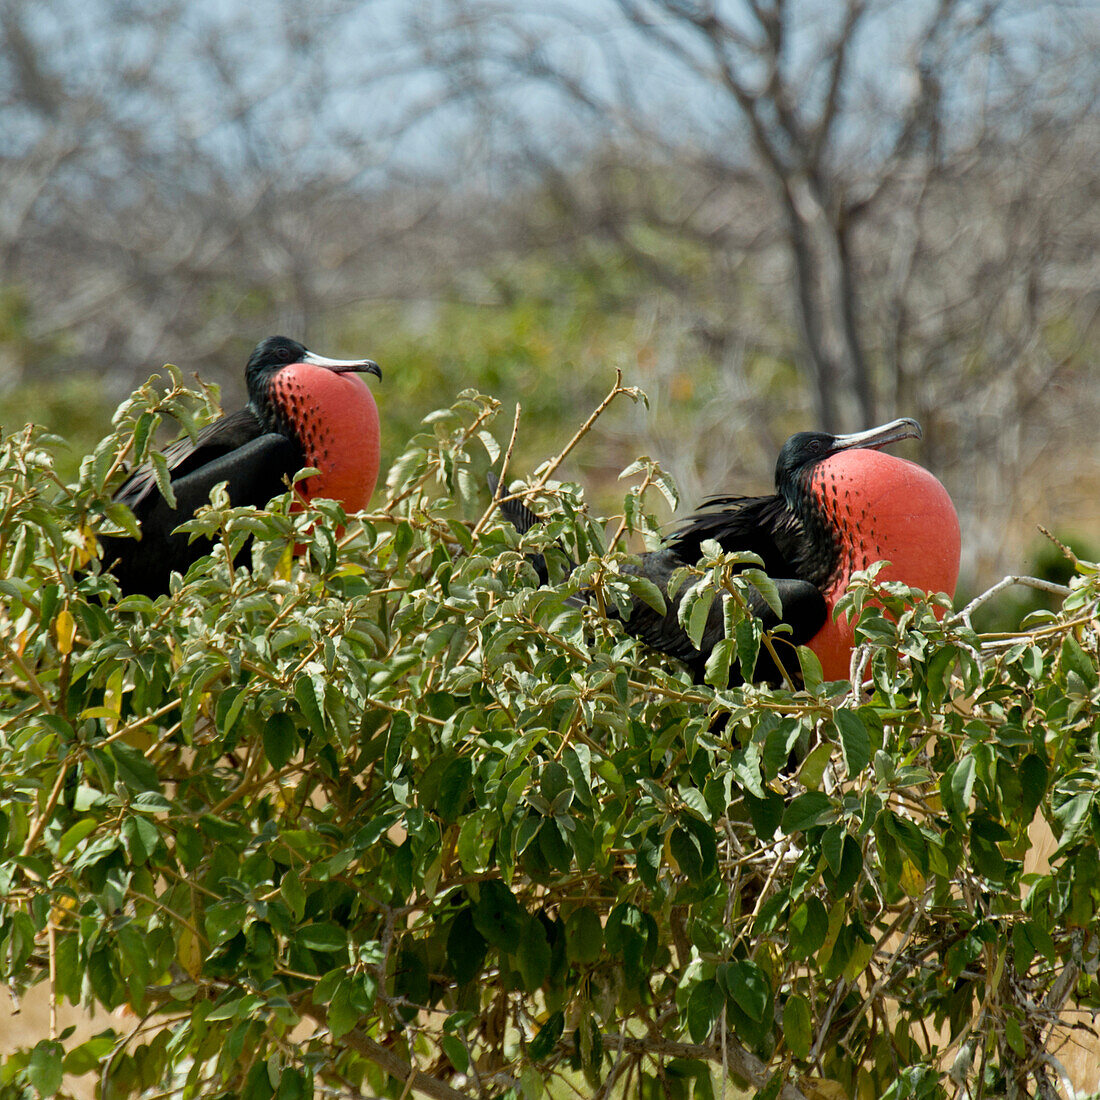 'Two Frigatebirds With Inflated Red Throat Pouches; Galapagos, Equador'